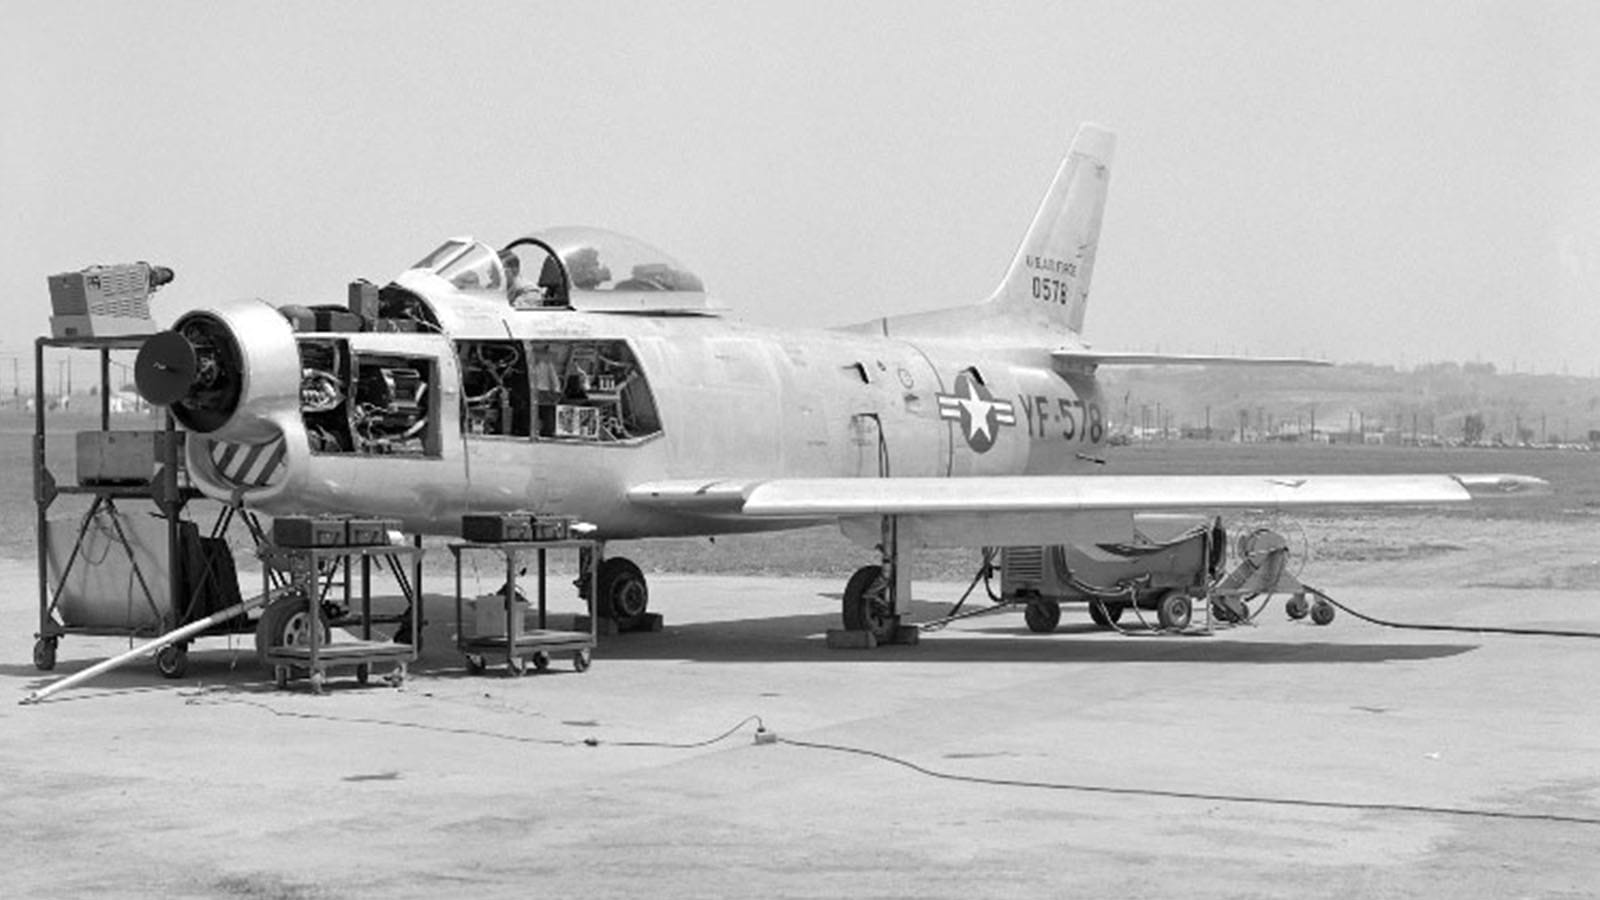 North American F-86D Sabre Interceptor with Hughes E-4 Fire Control System. 